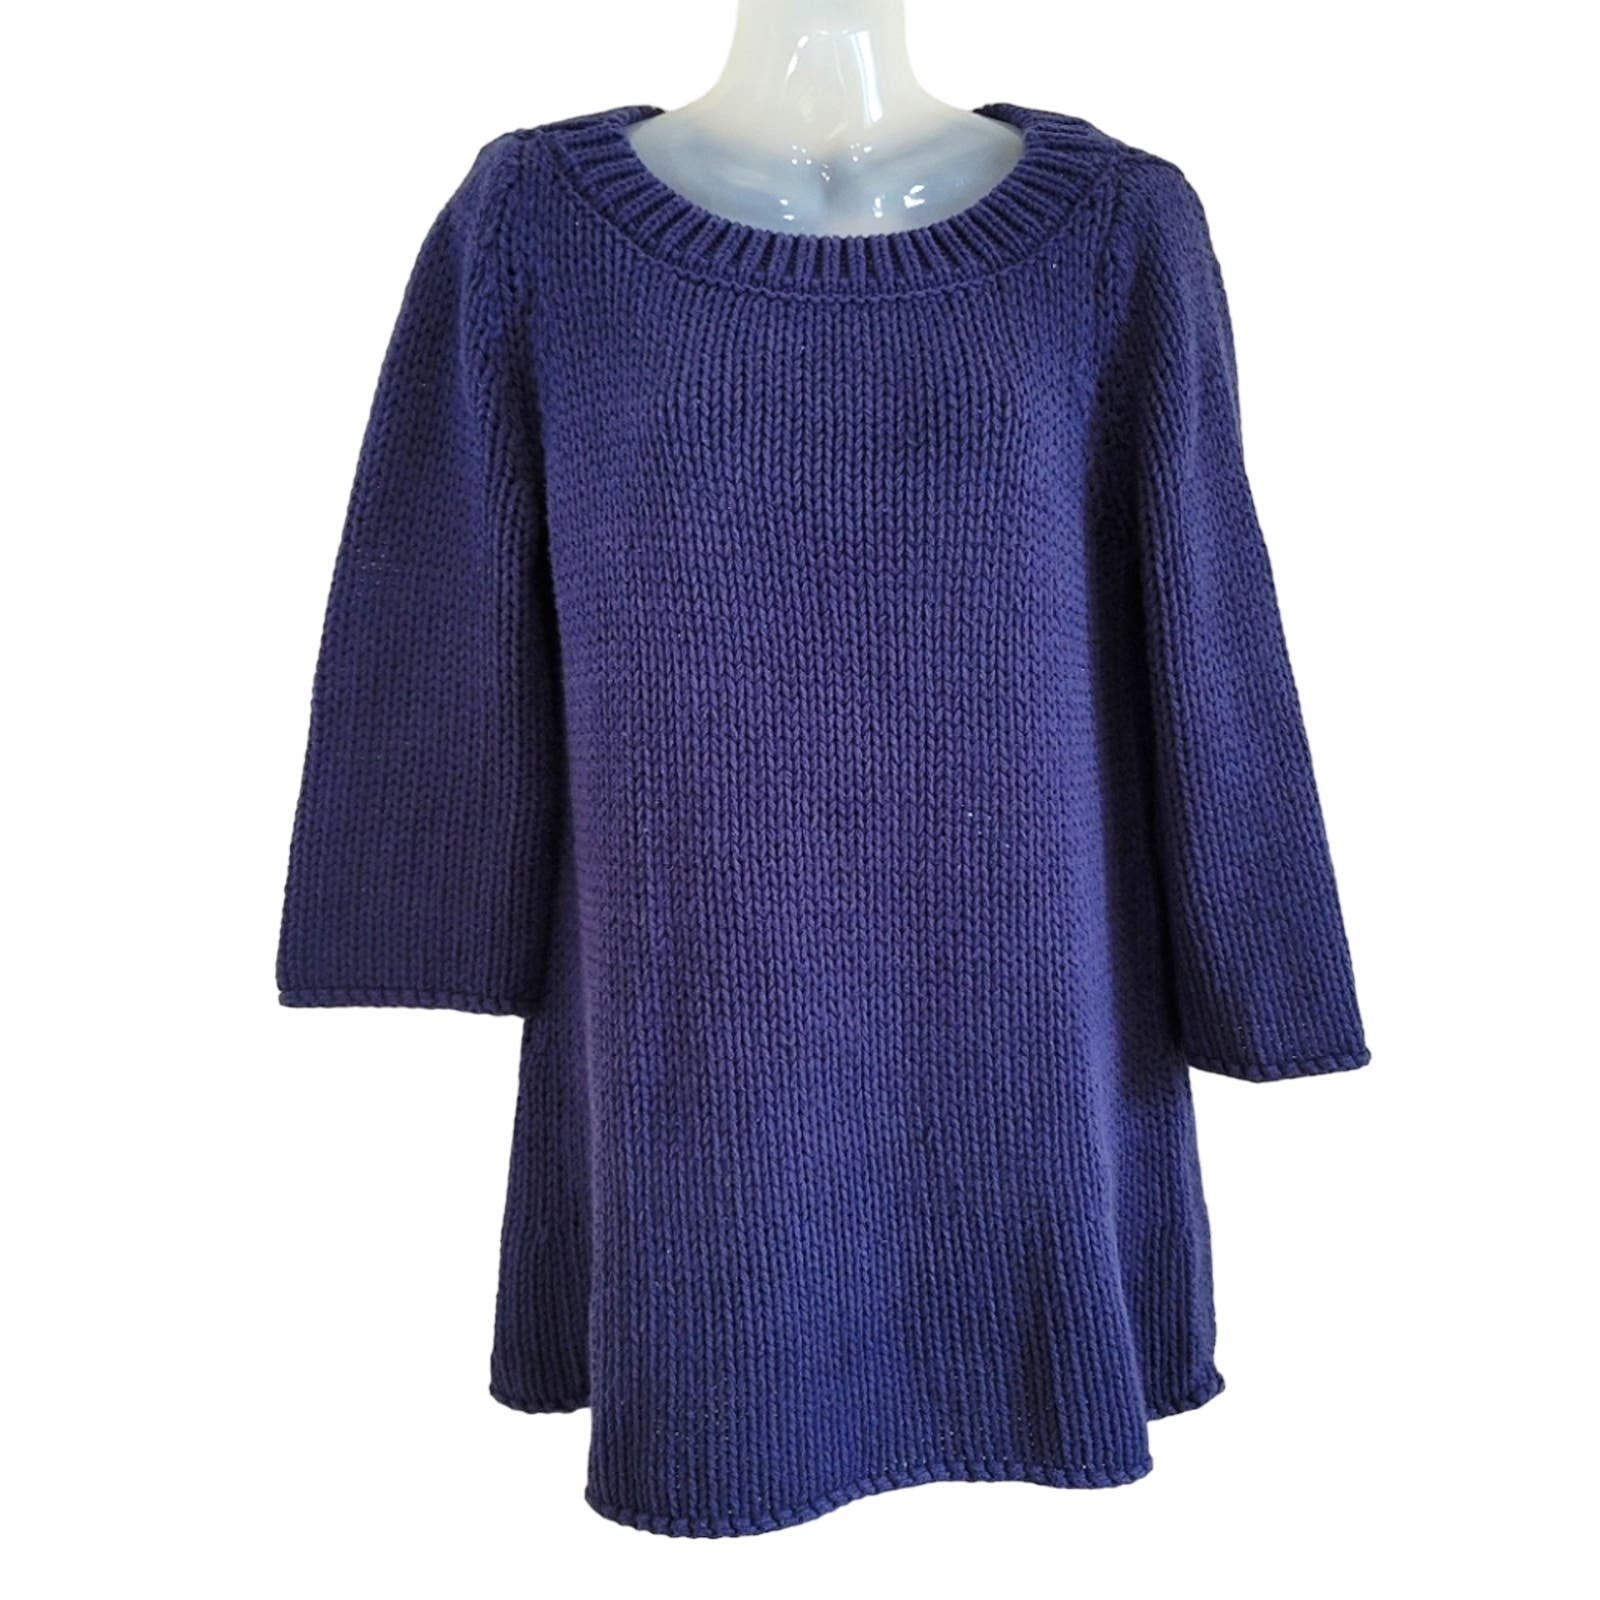 Discounted Soft Surroundings Open Loose Chunky Knit Sweater Dress Navy Blue Size Small KSptQ4hmA US Sale